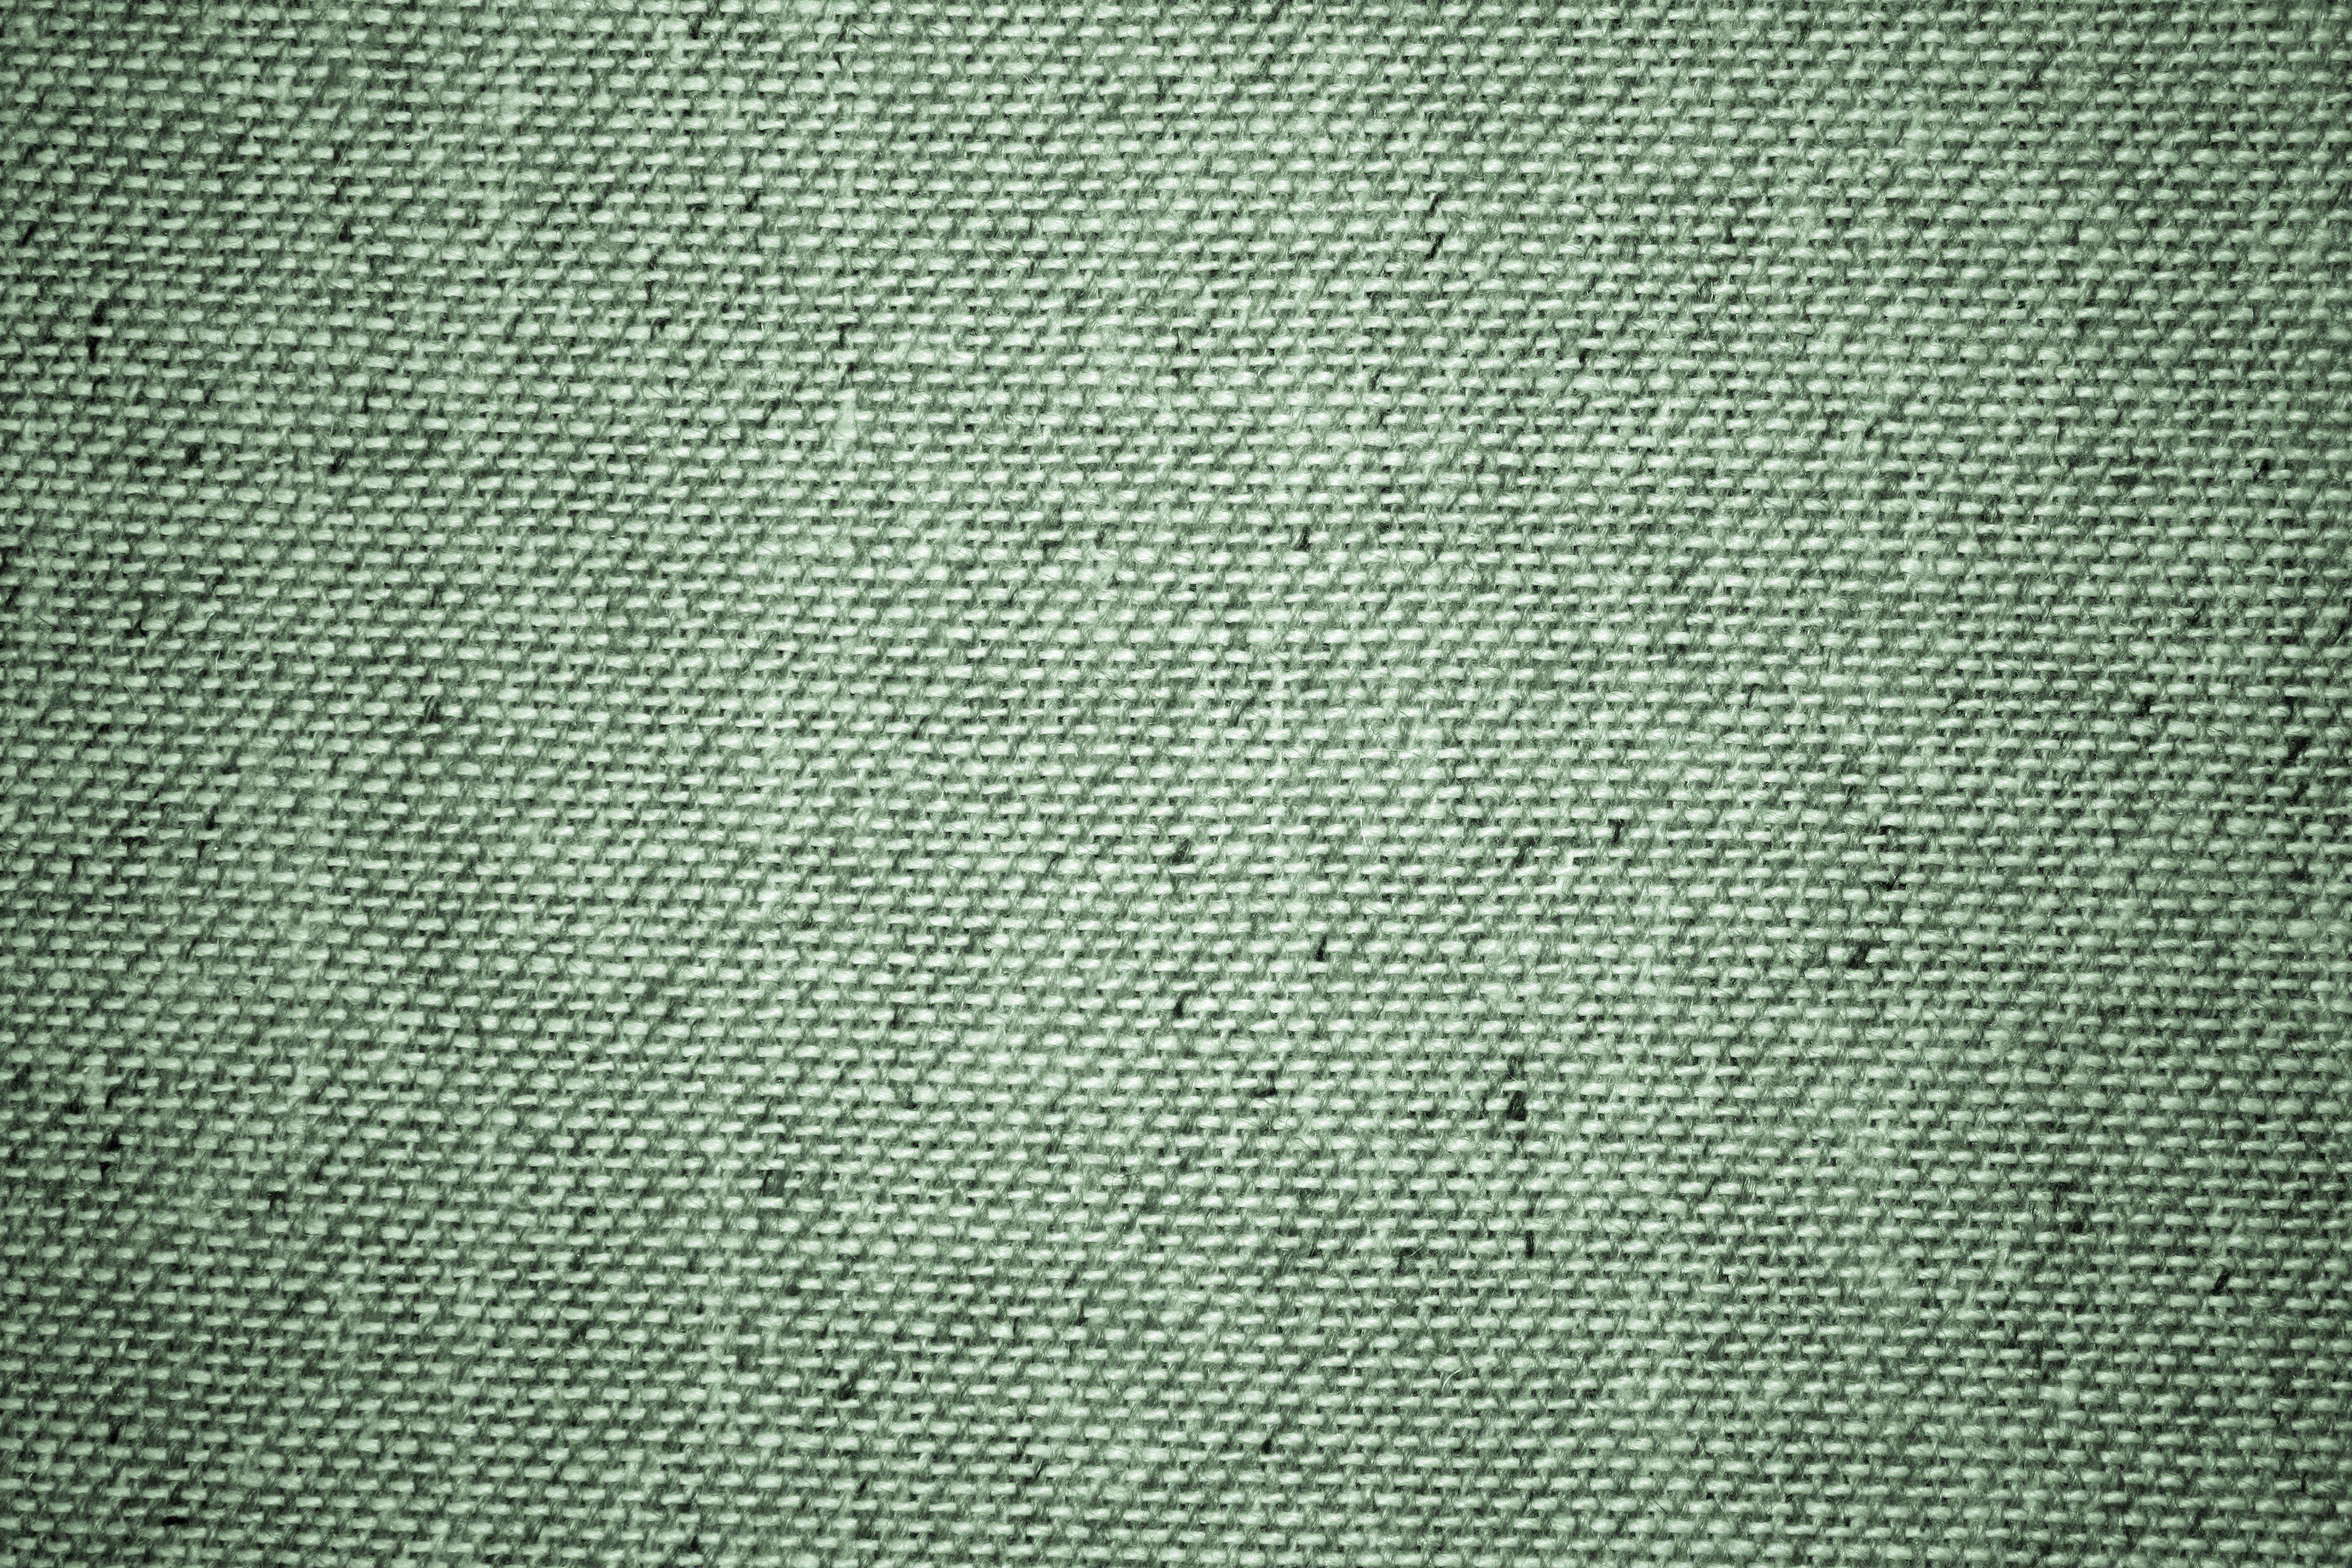 Sage Green Upholstery Fabric Close Up Texture Picture. Free